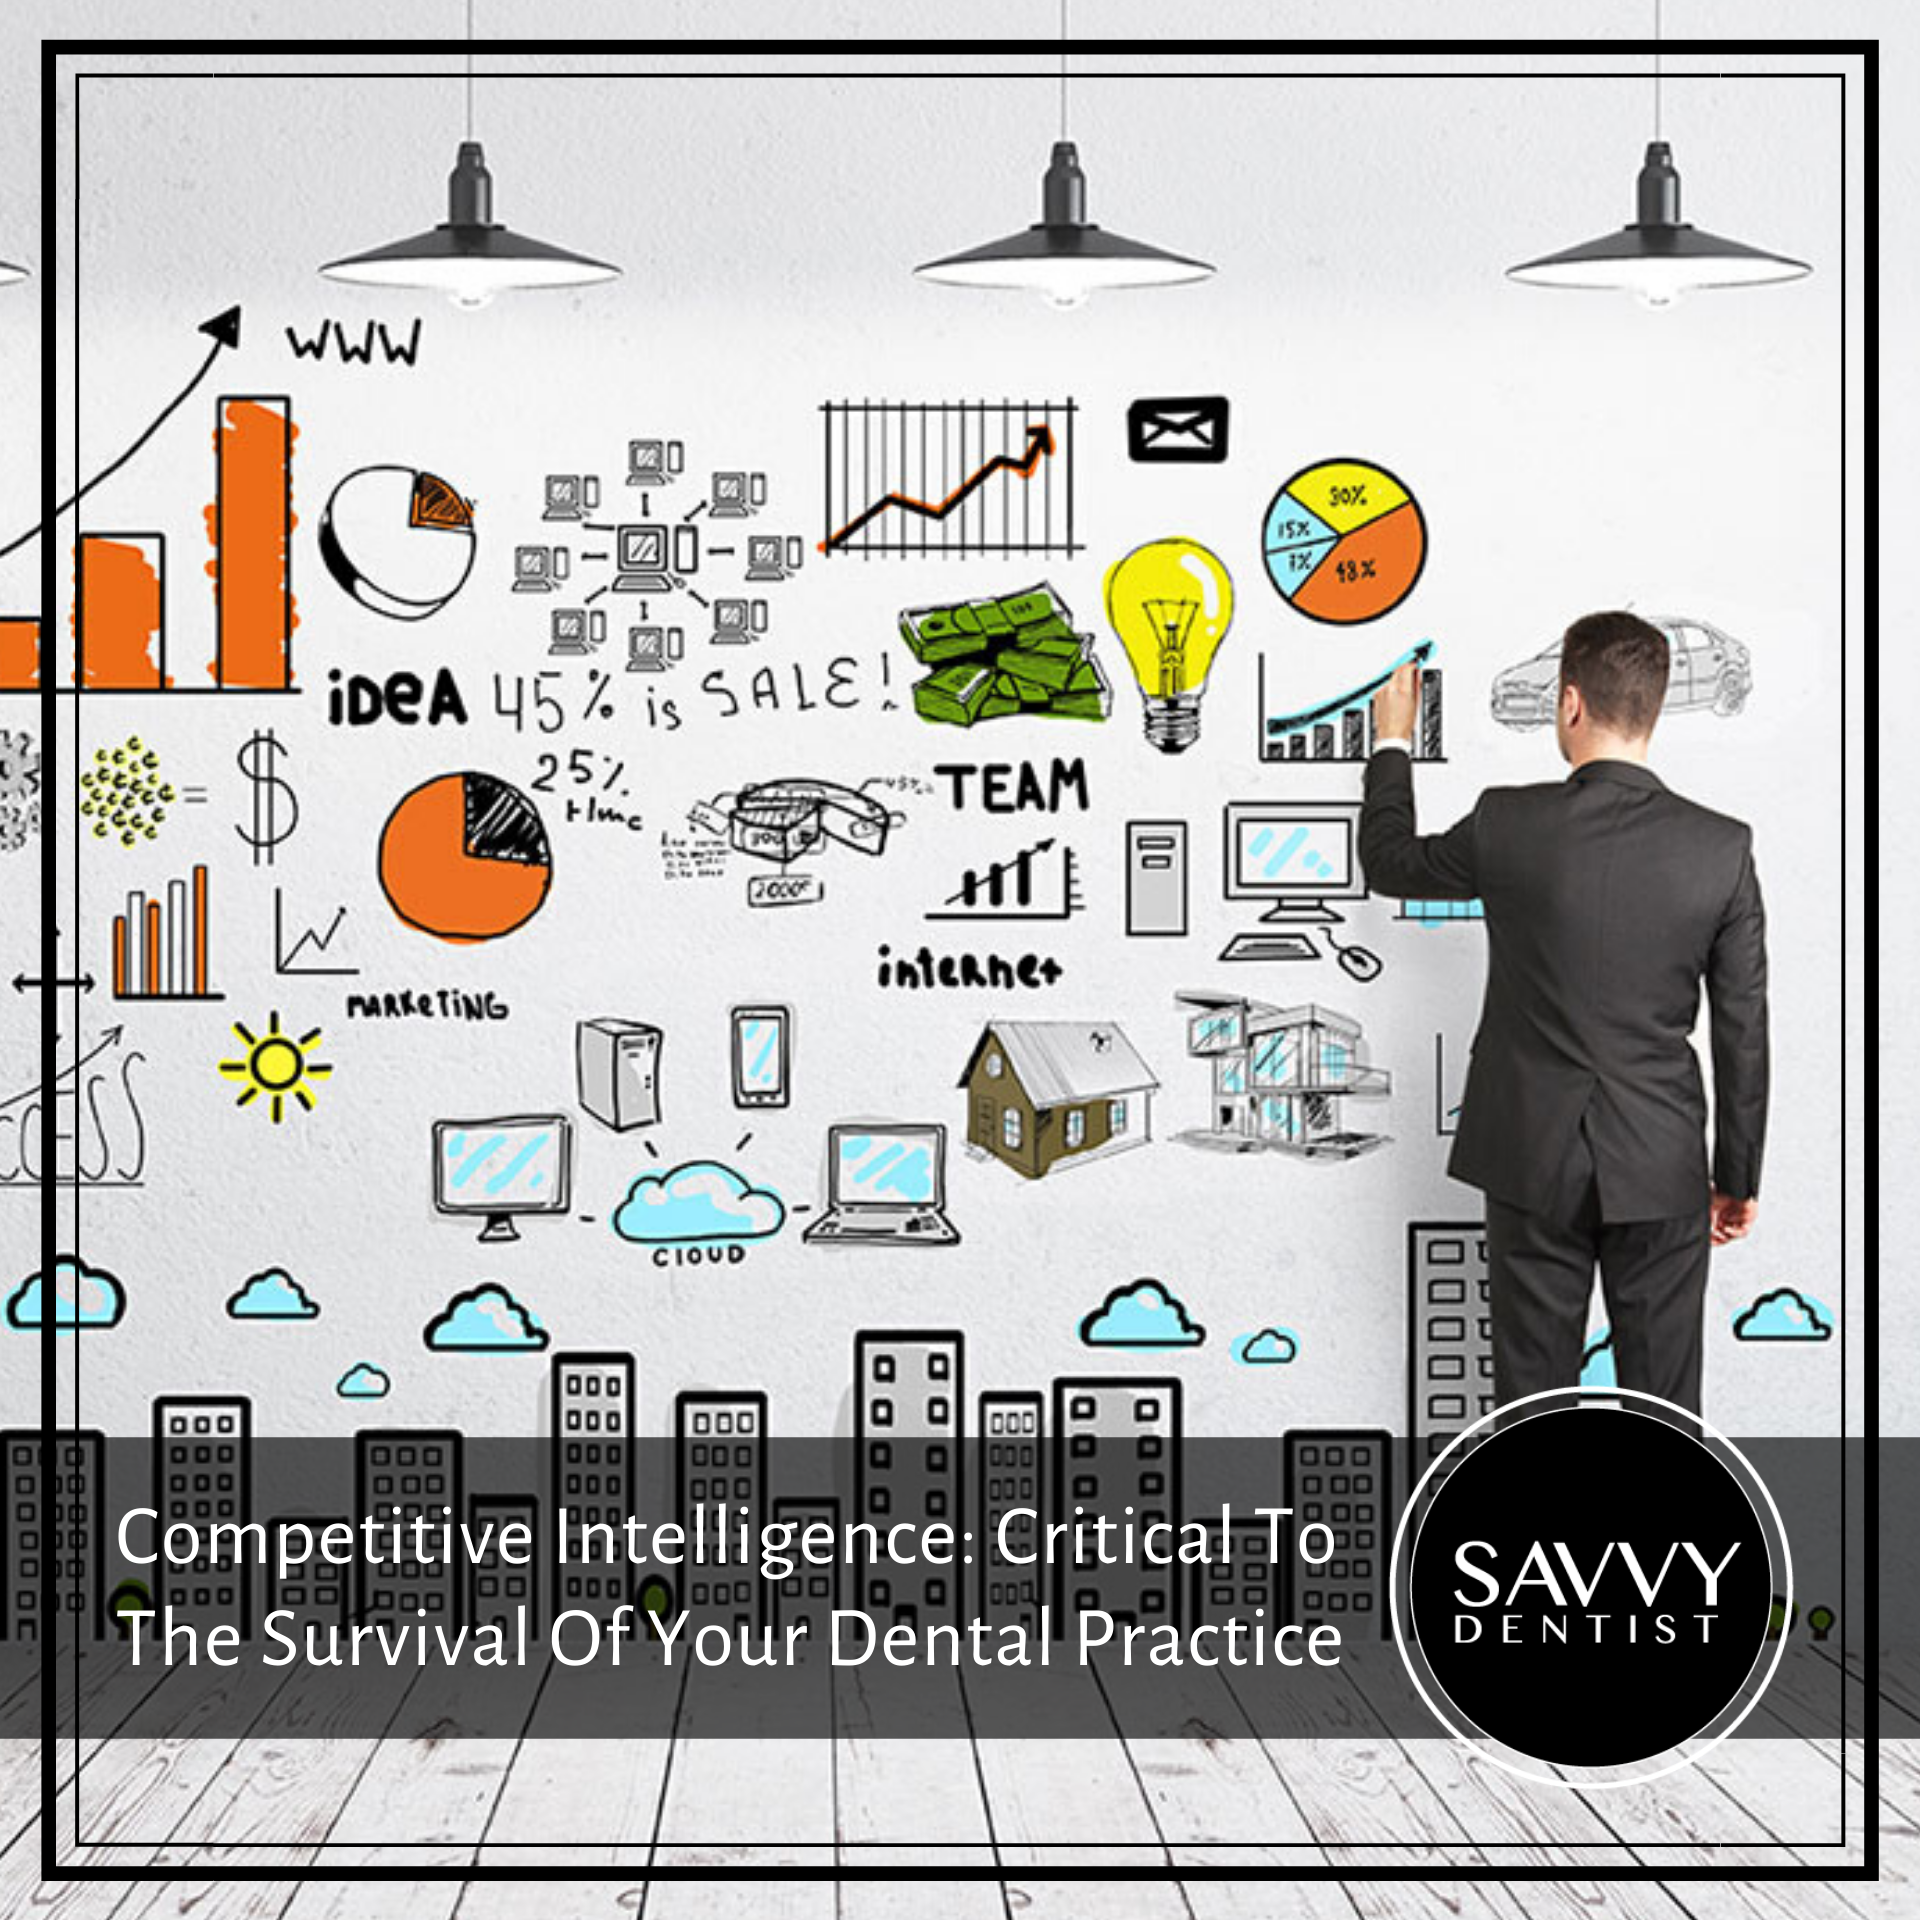 Competitive Intelligence: Critical To The Survival Of Your Dental Practice